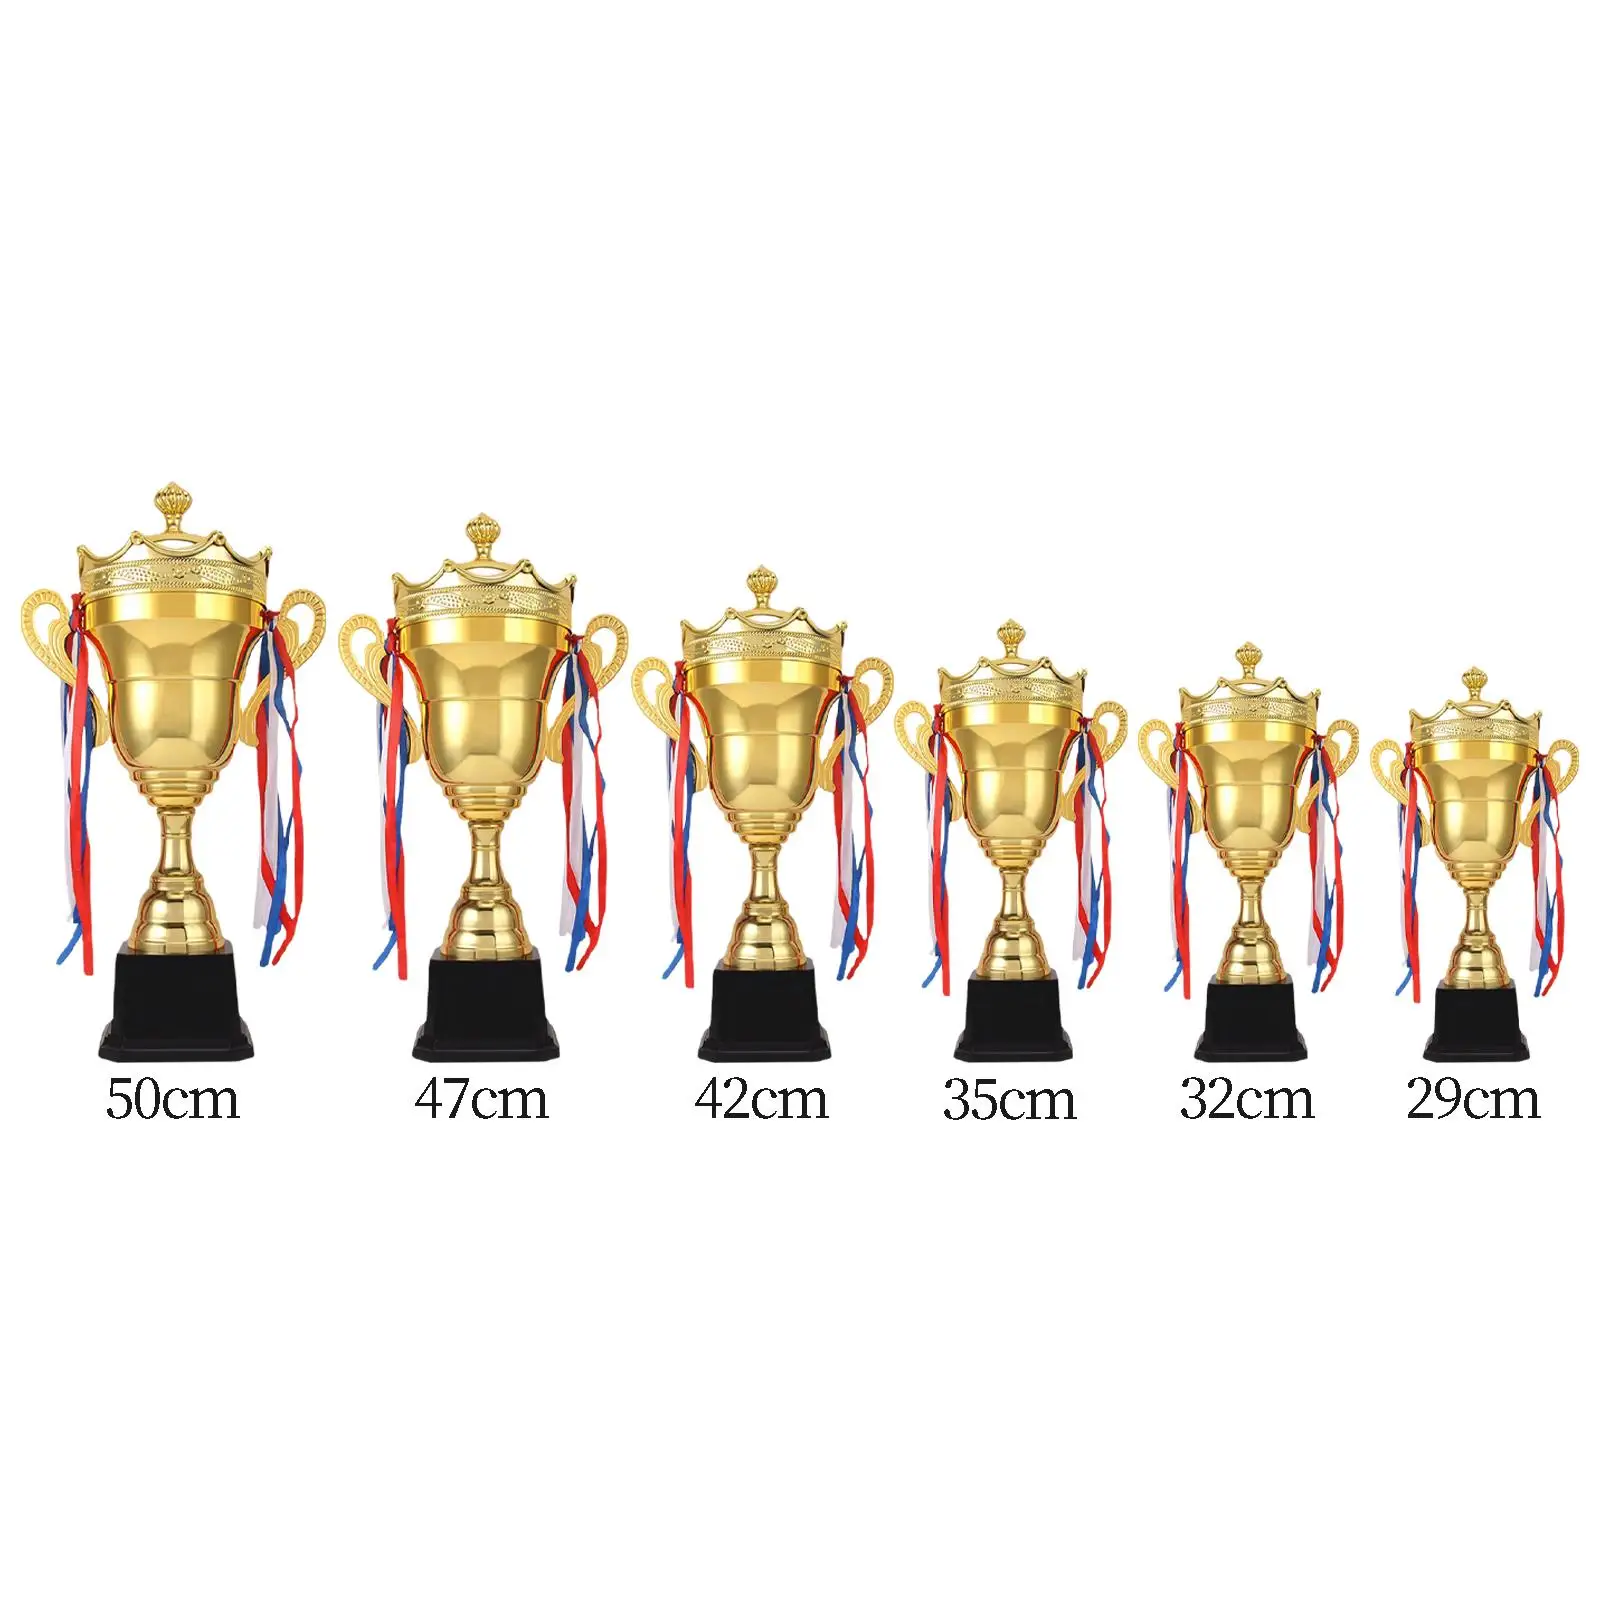 Trophy Cup Rewards Prizes for Sports Football Soccer Baseball Competitions